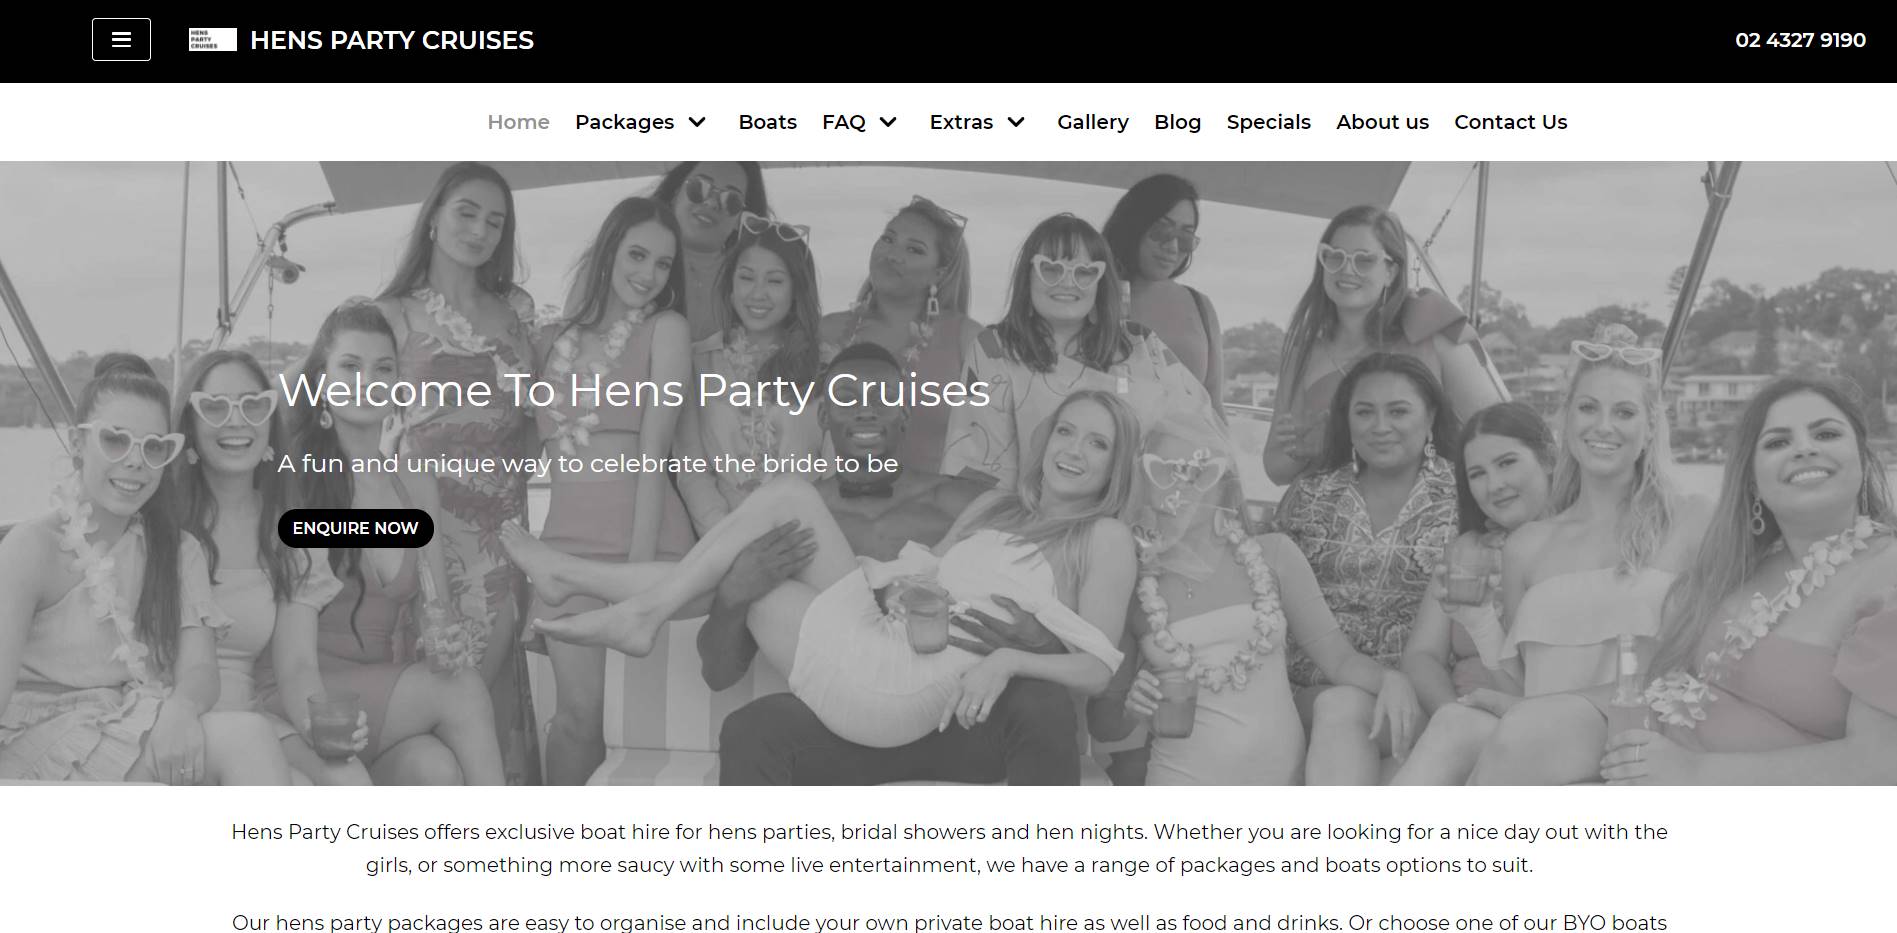 Hens Party Cruises